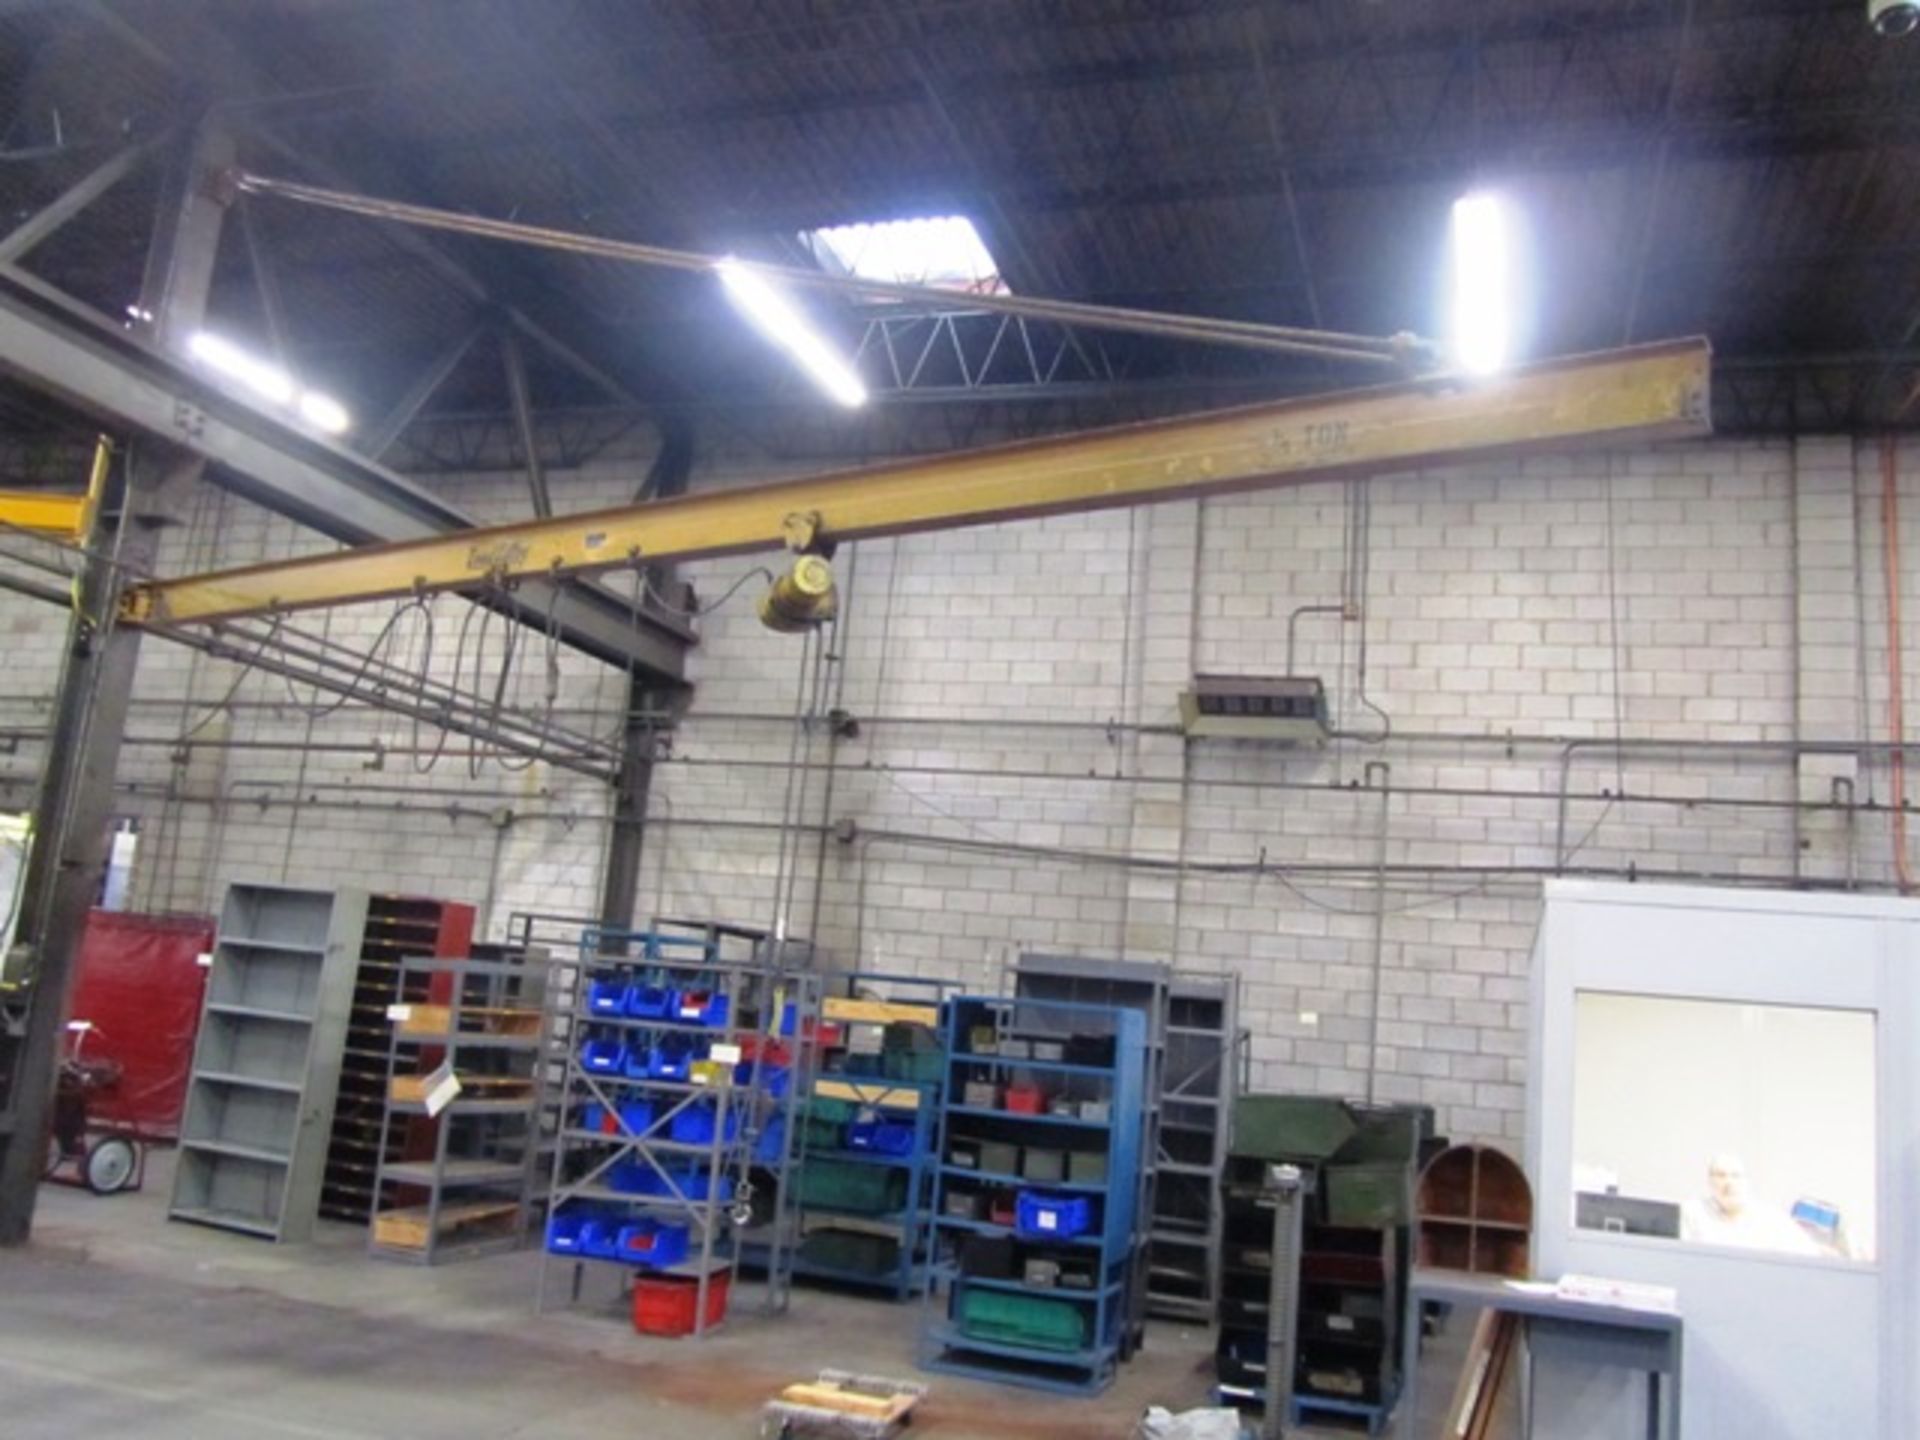 1/4 Ton Jib Arm with Budgit 1/4 Ton Electric Hoist with Pendant Control